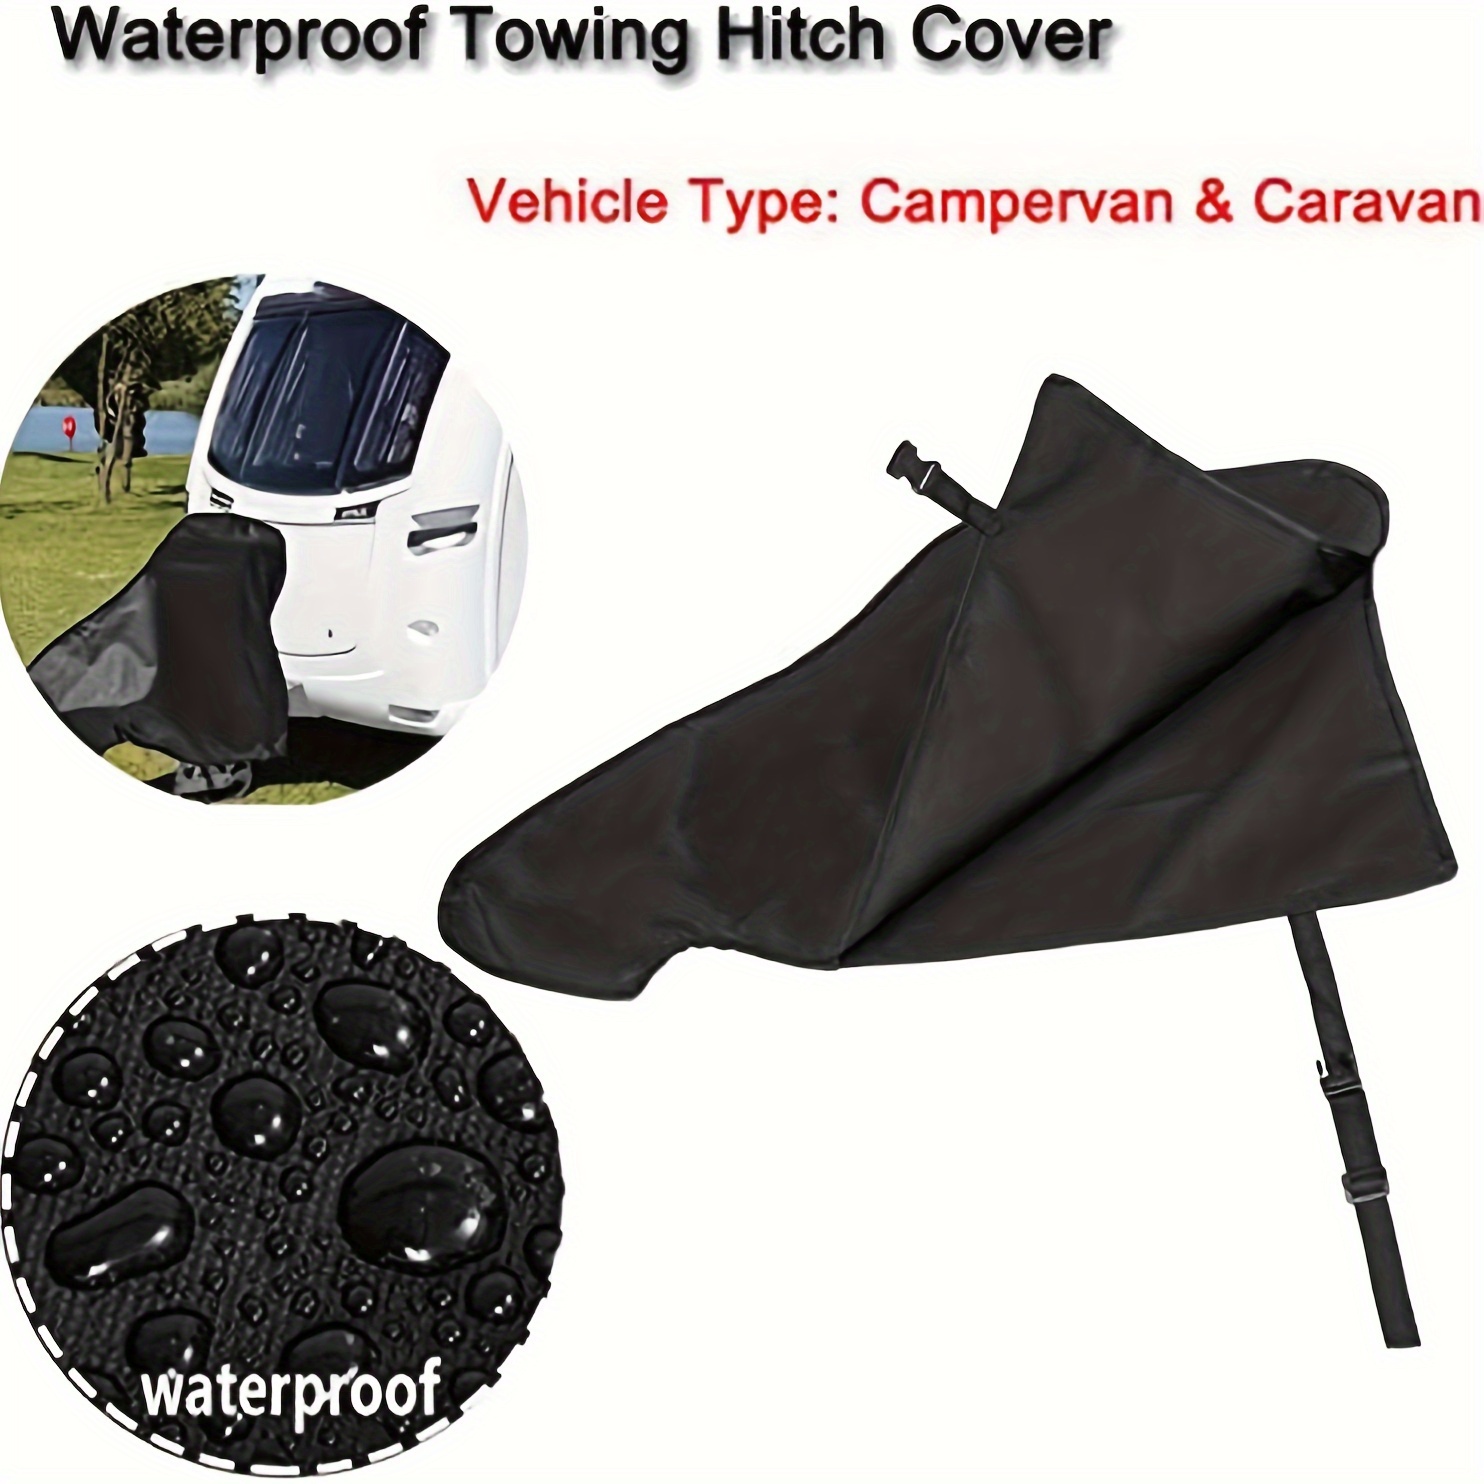 

Waterproof Towing Hitch Cover For Campervans & - Uv, Snow, Water & Dust Protection - 40cm/15.75in X 87cm/34.25in X 62cm/24.41in - Pvc Material